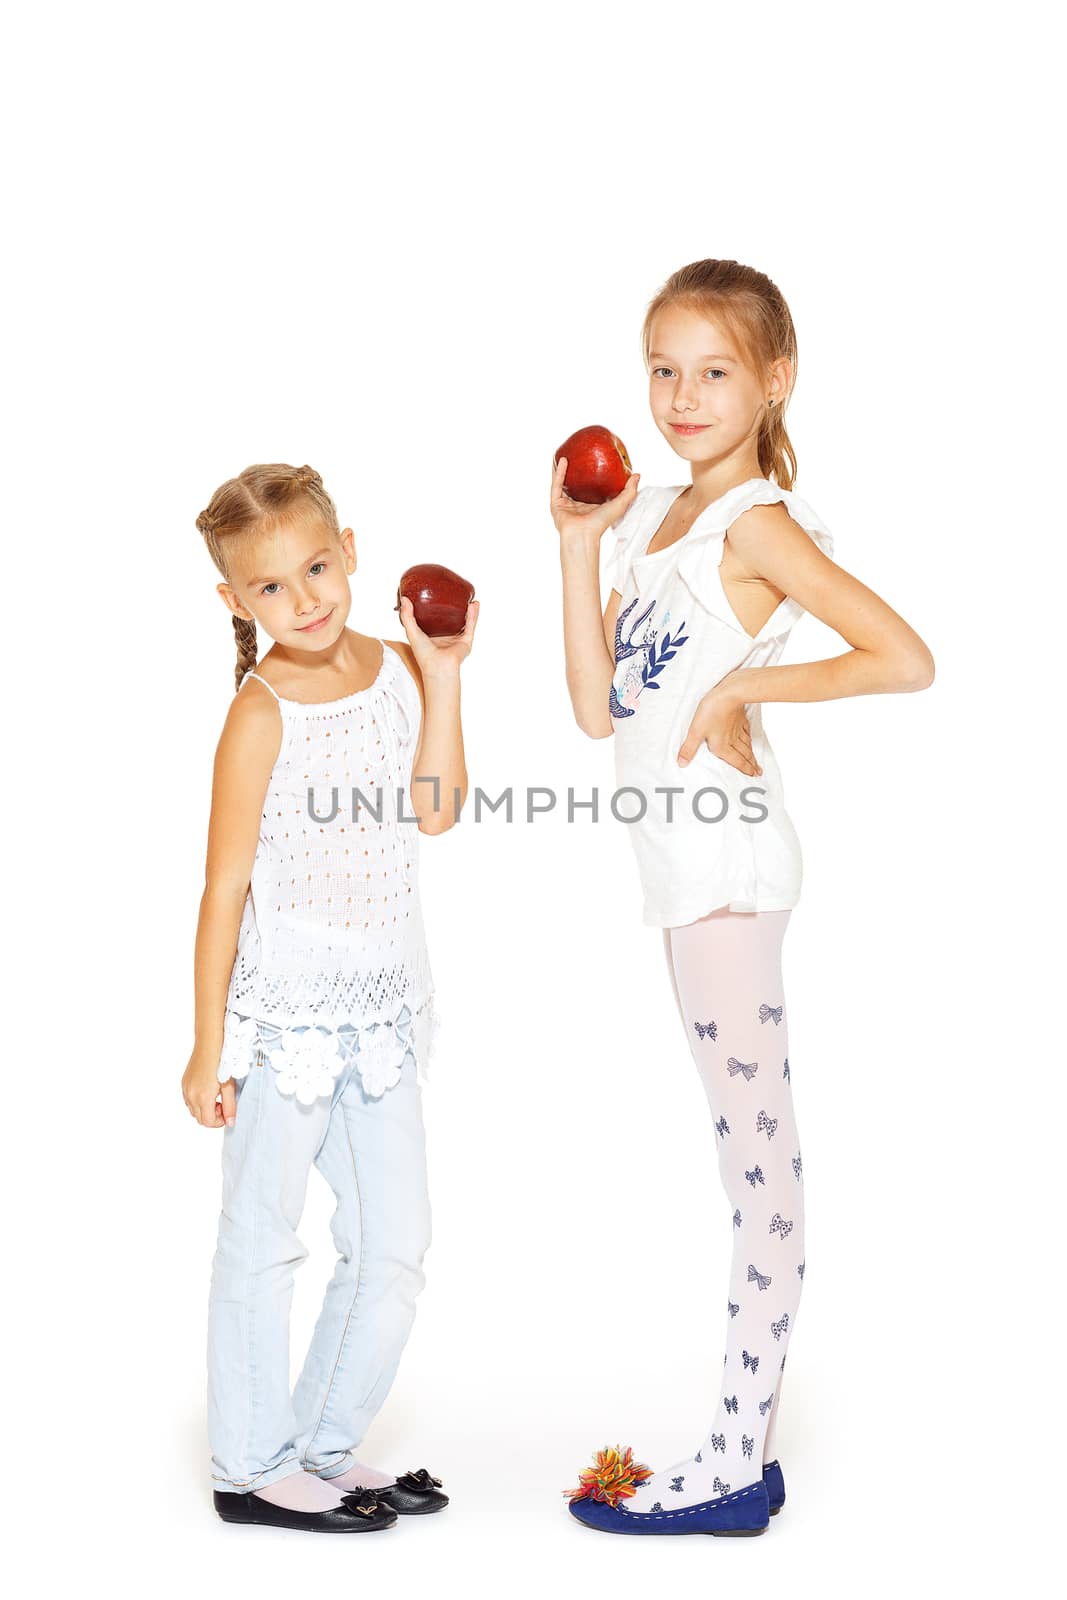 Beauty young girls with fresh apples. Healthy lifestyle. Happiness. White background.